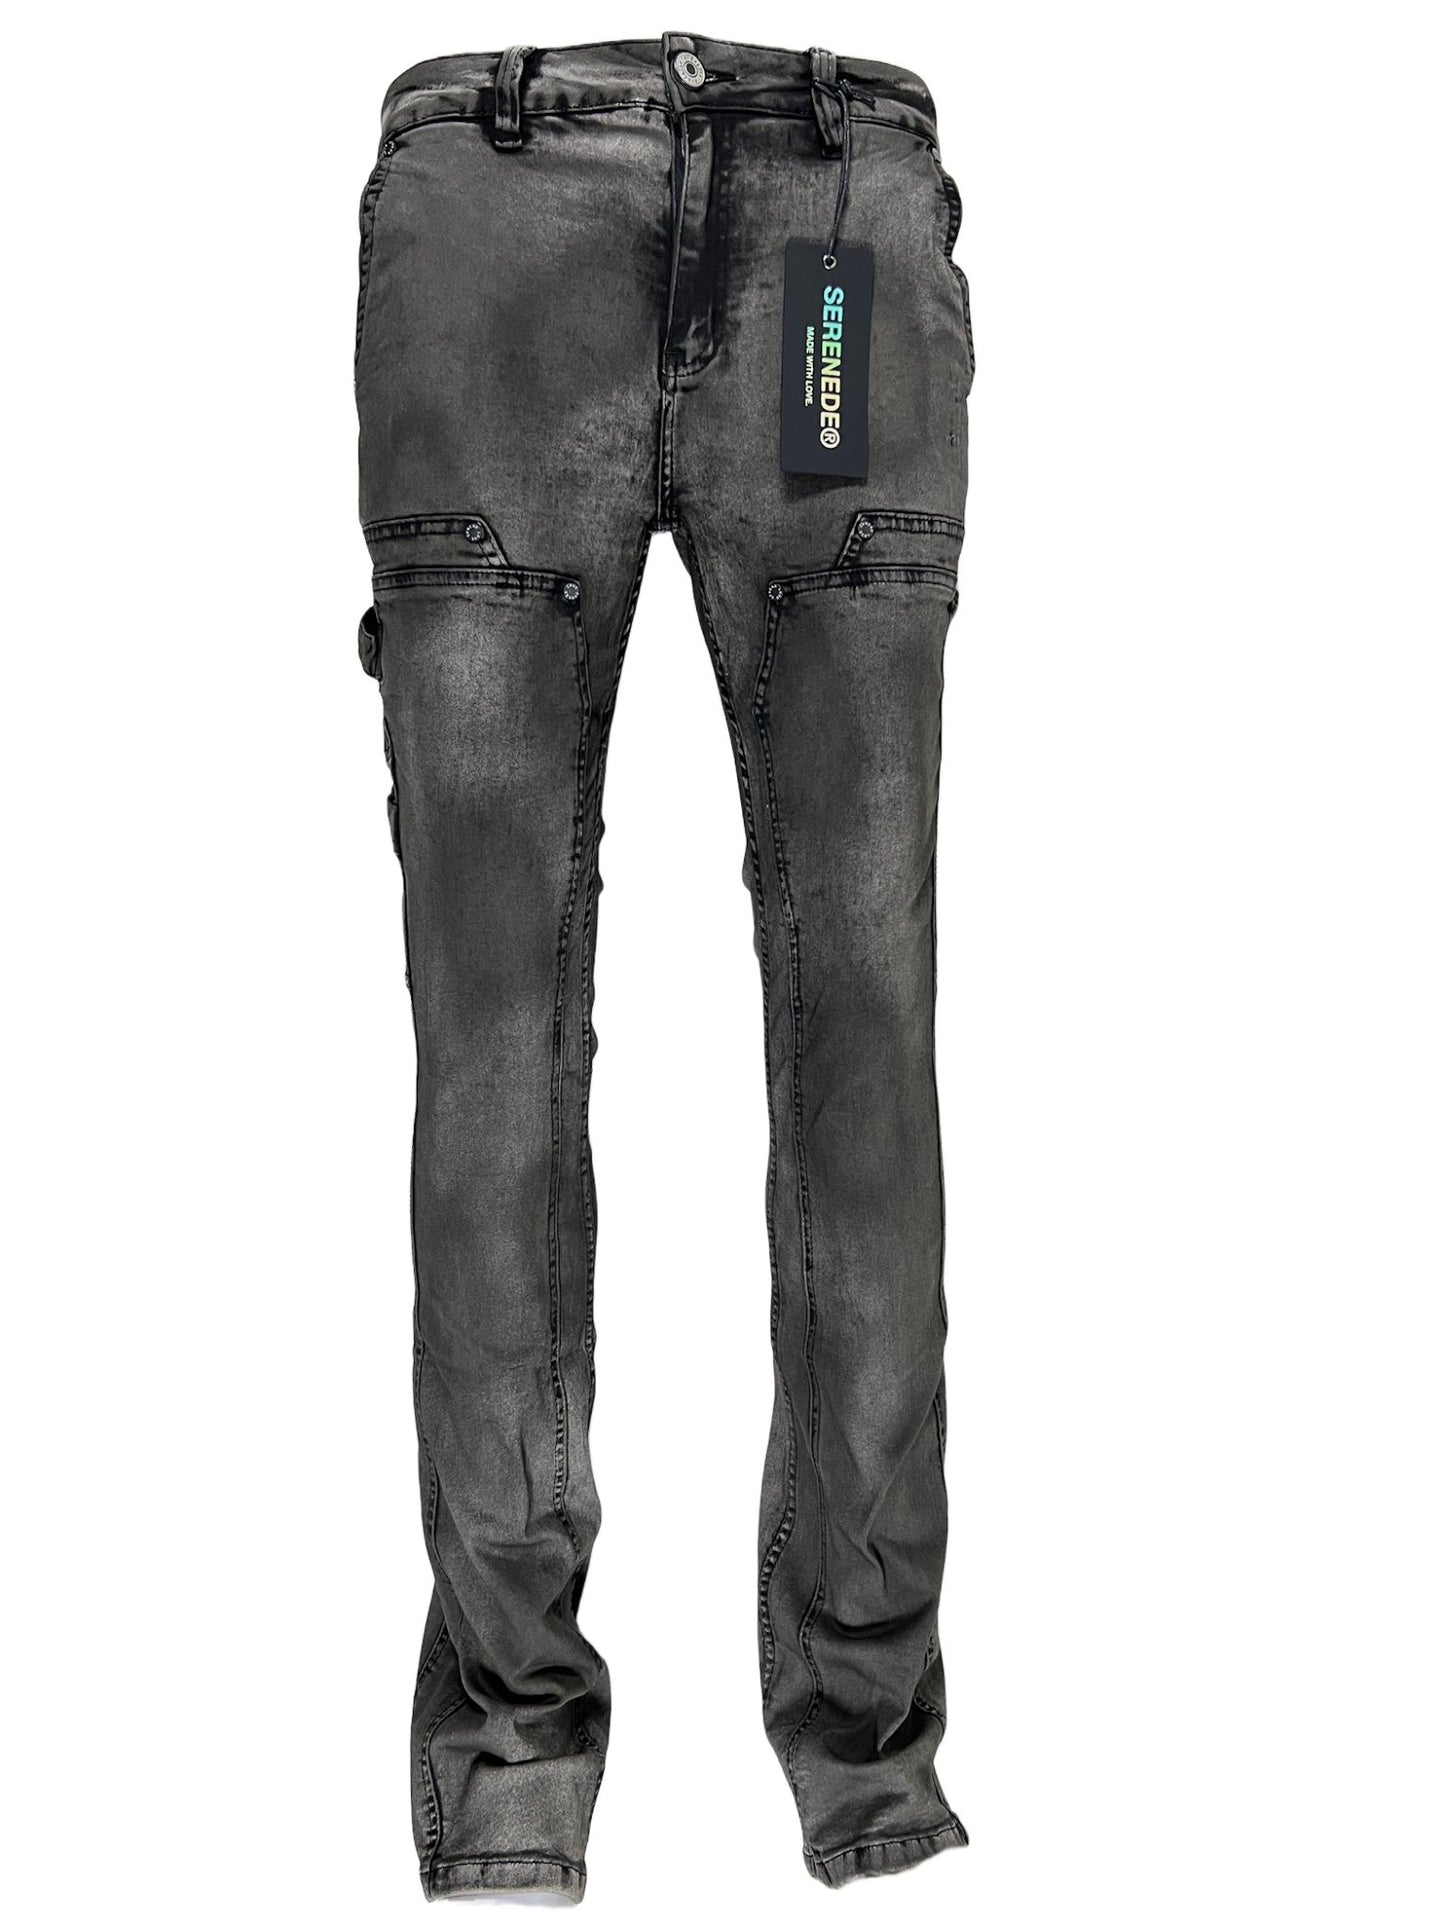 SERENEDE RAIN STACKED JEANS GREY - Probus